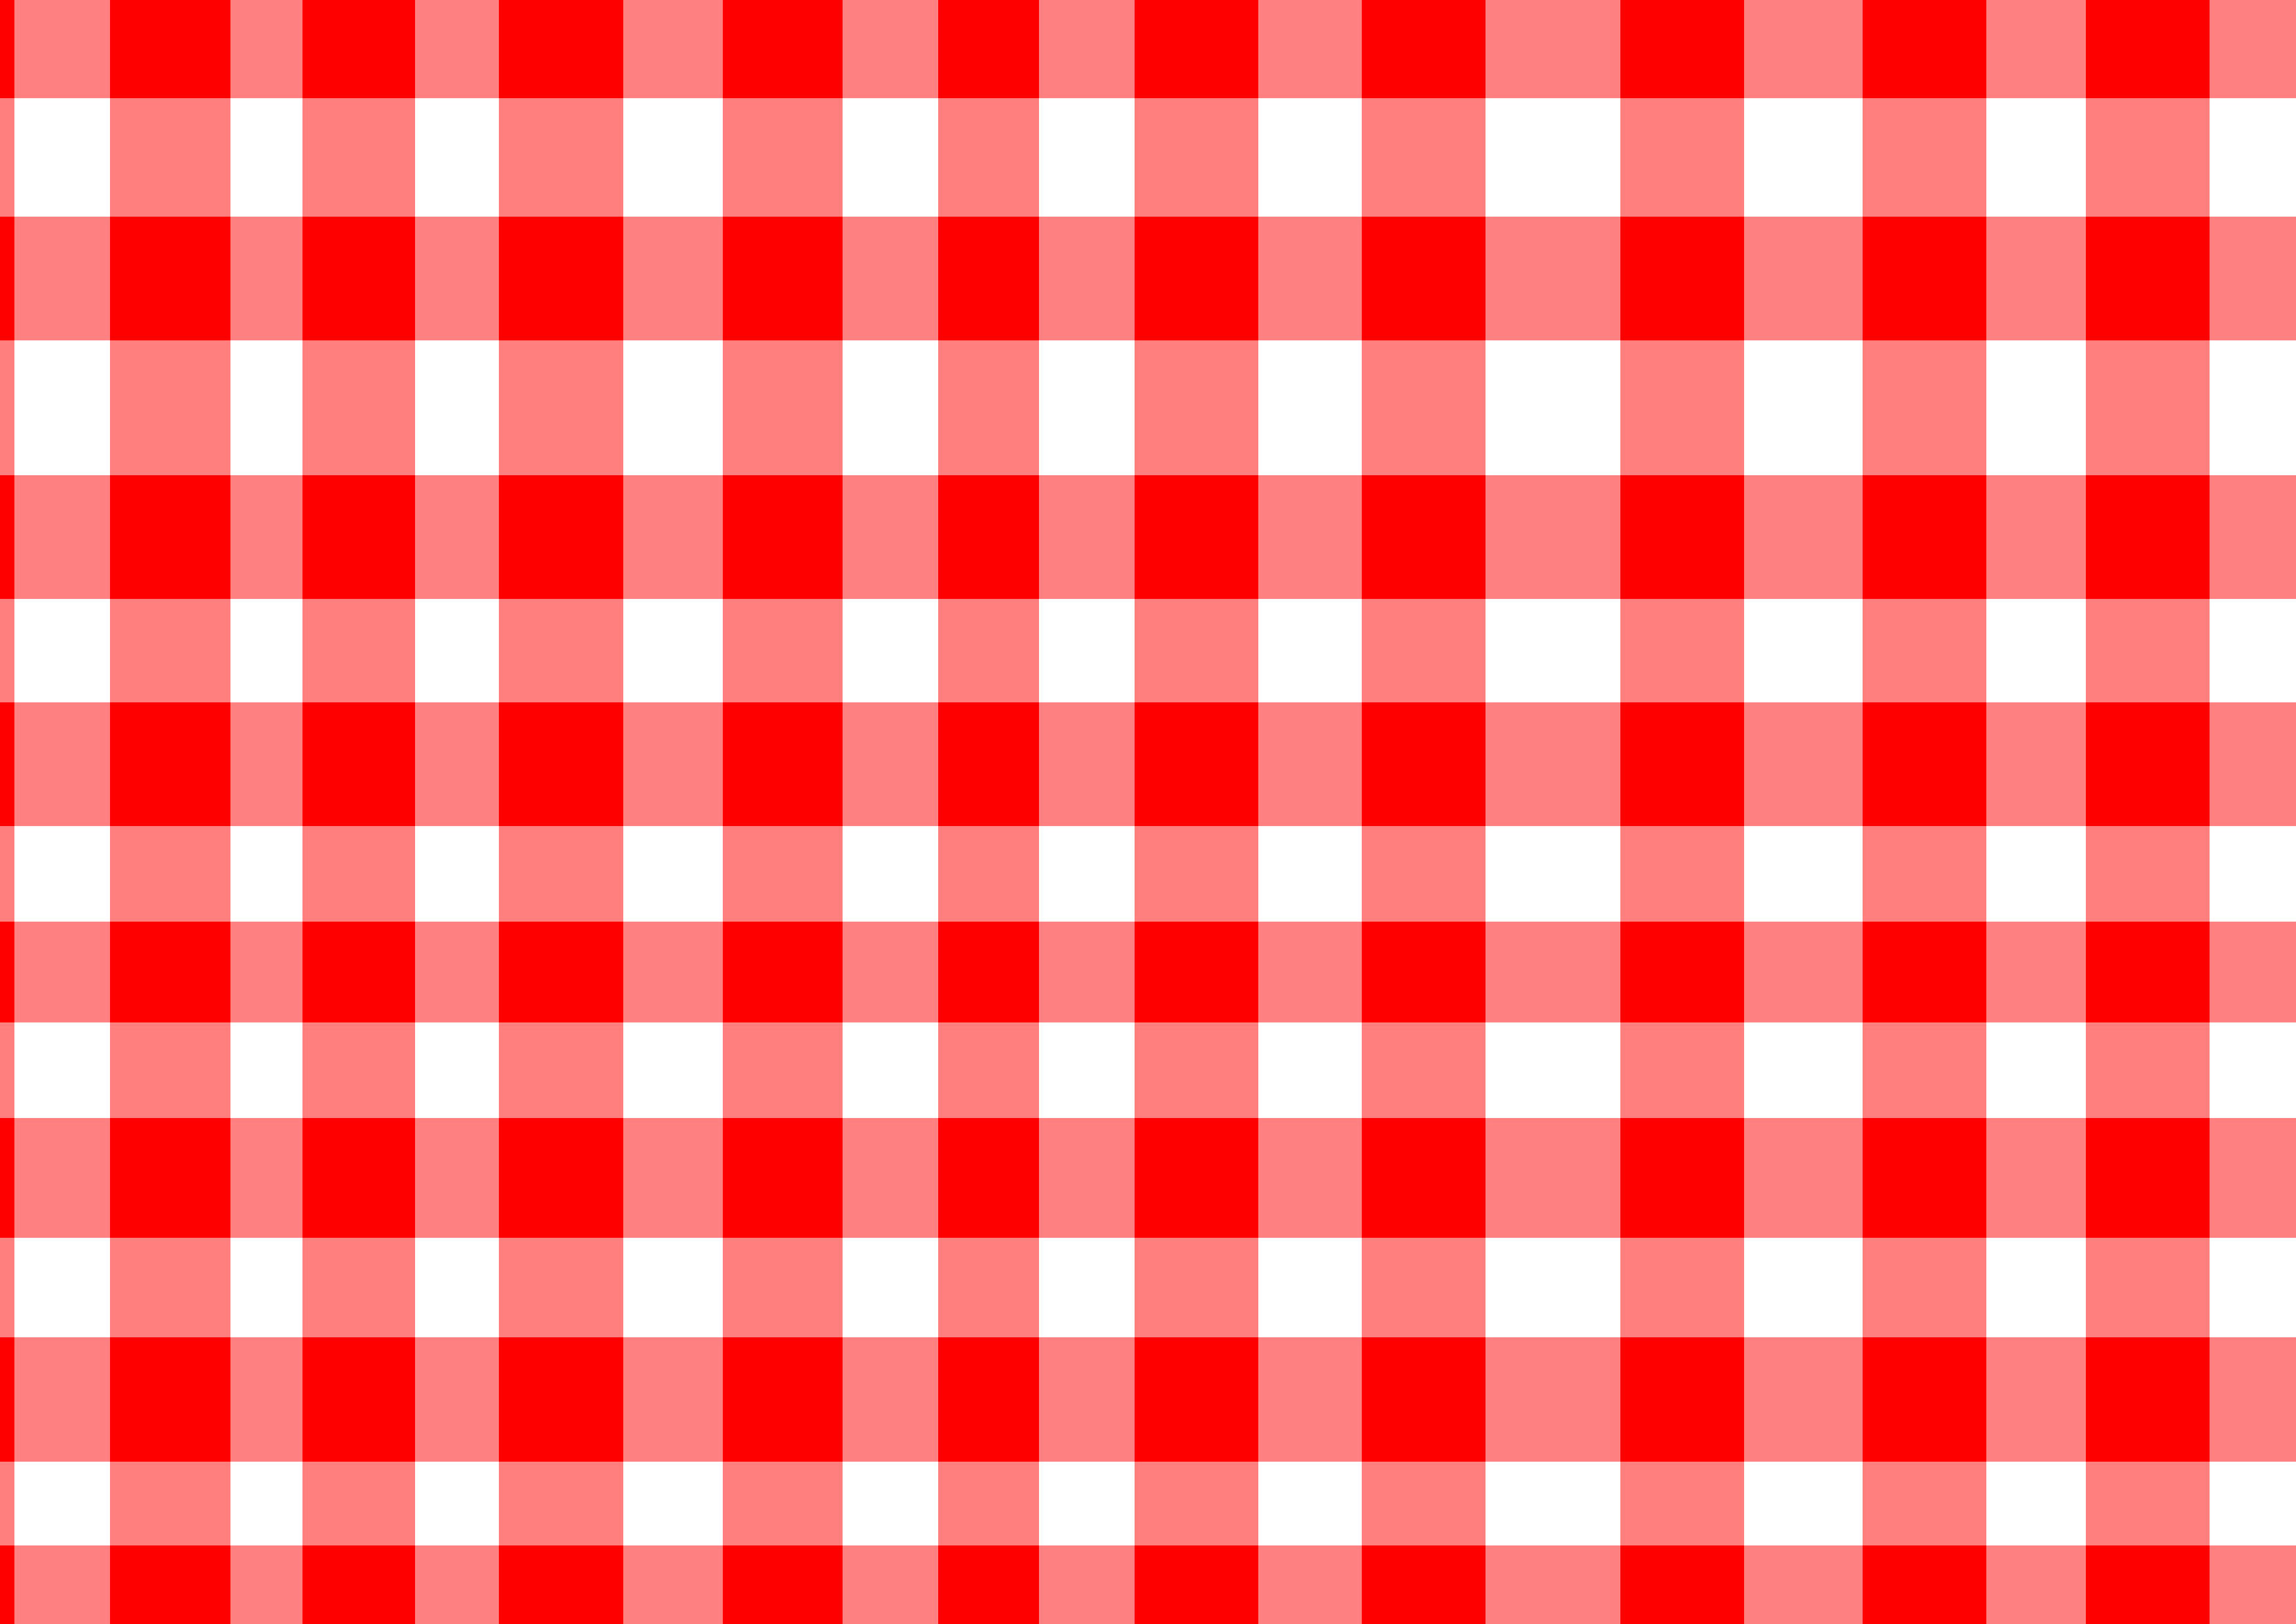 red and white gingham check a4jpg